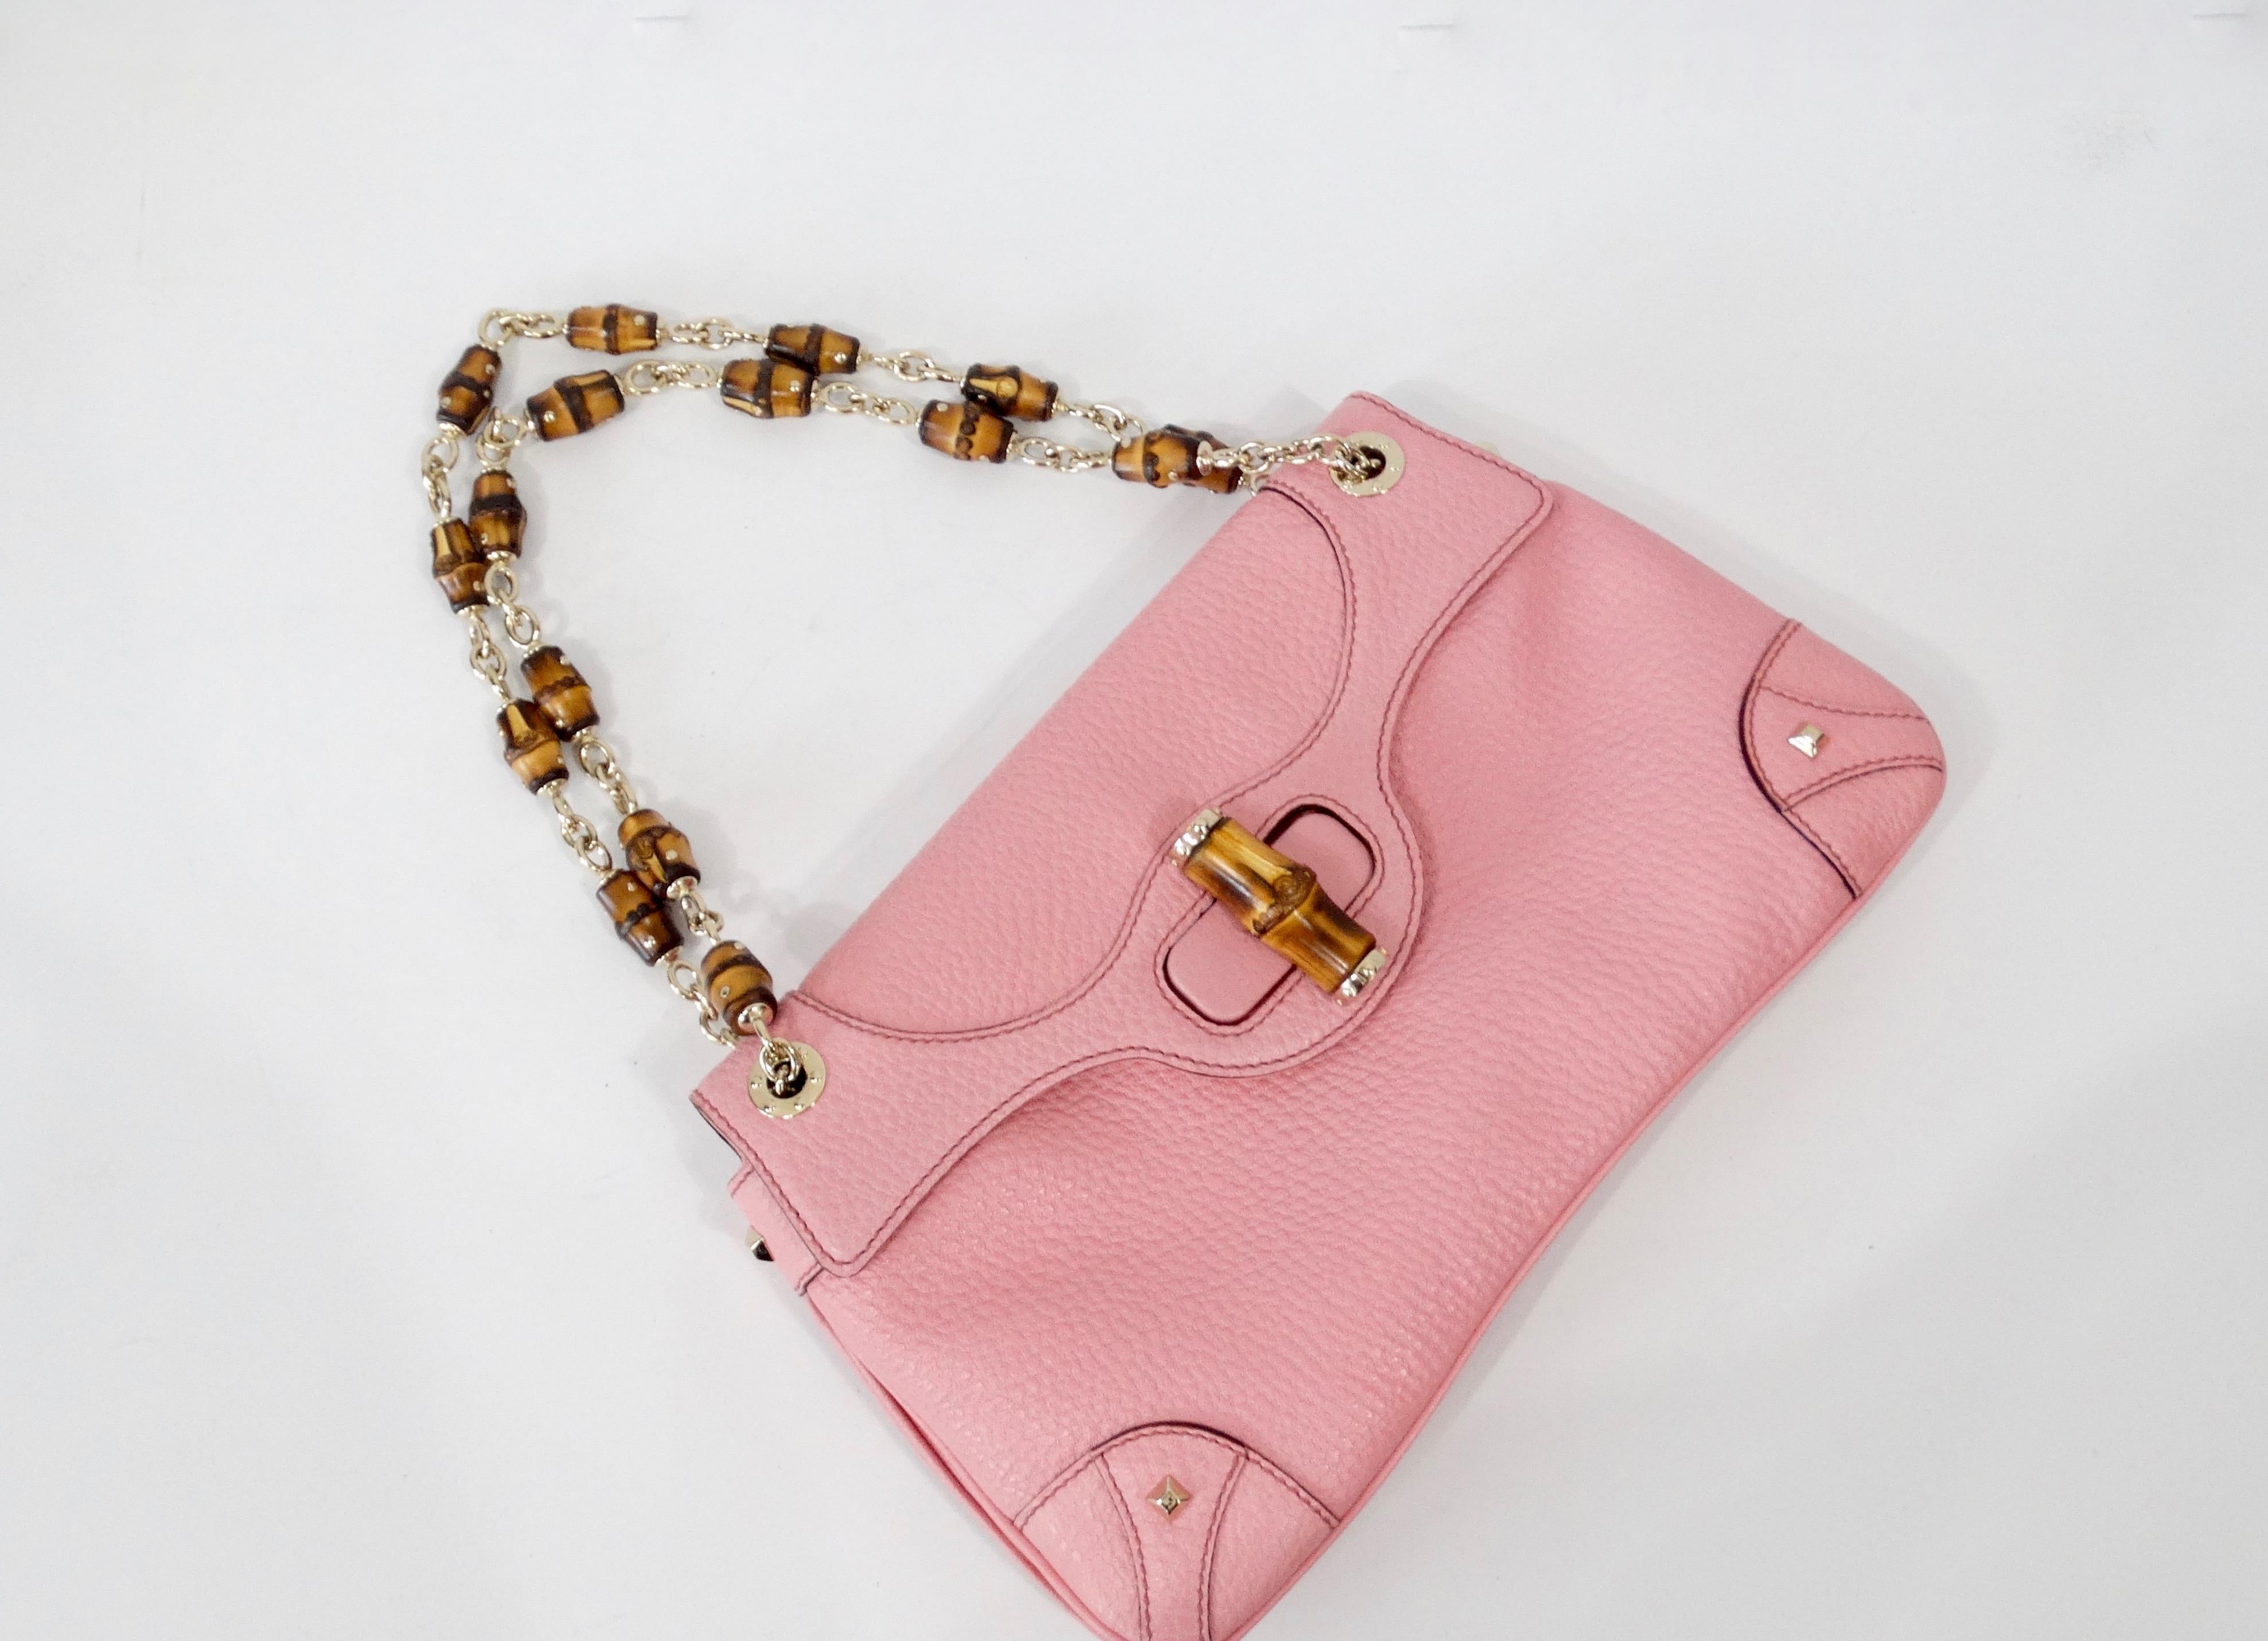 Always be ready for a getaway with this adorable Tom Ford for Gucci shoulder bag! Circa early 2000s, this light pink pebbled leather bag features gold-tone hardware, dual shoulder straps with chain link bamboo accents, and leather crafted detailing.